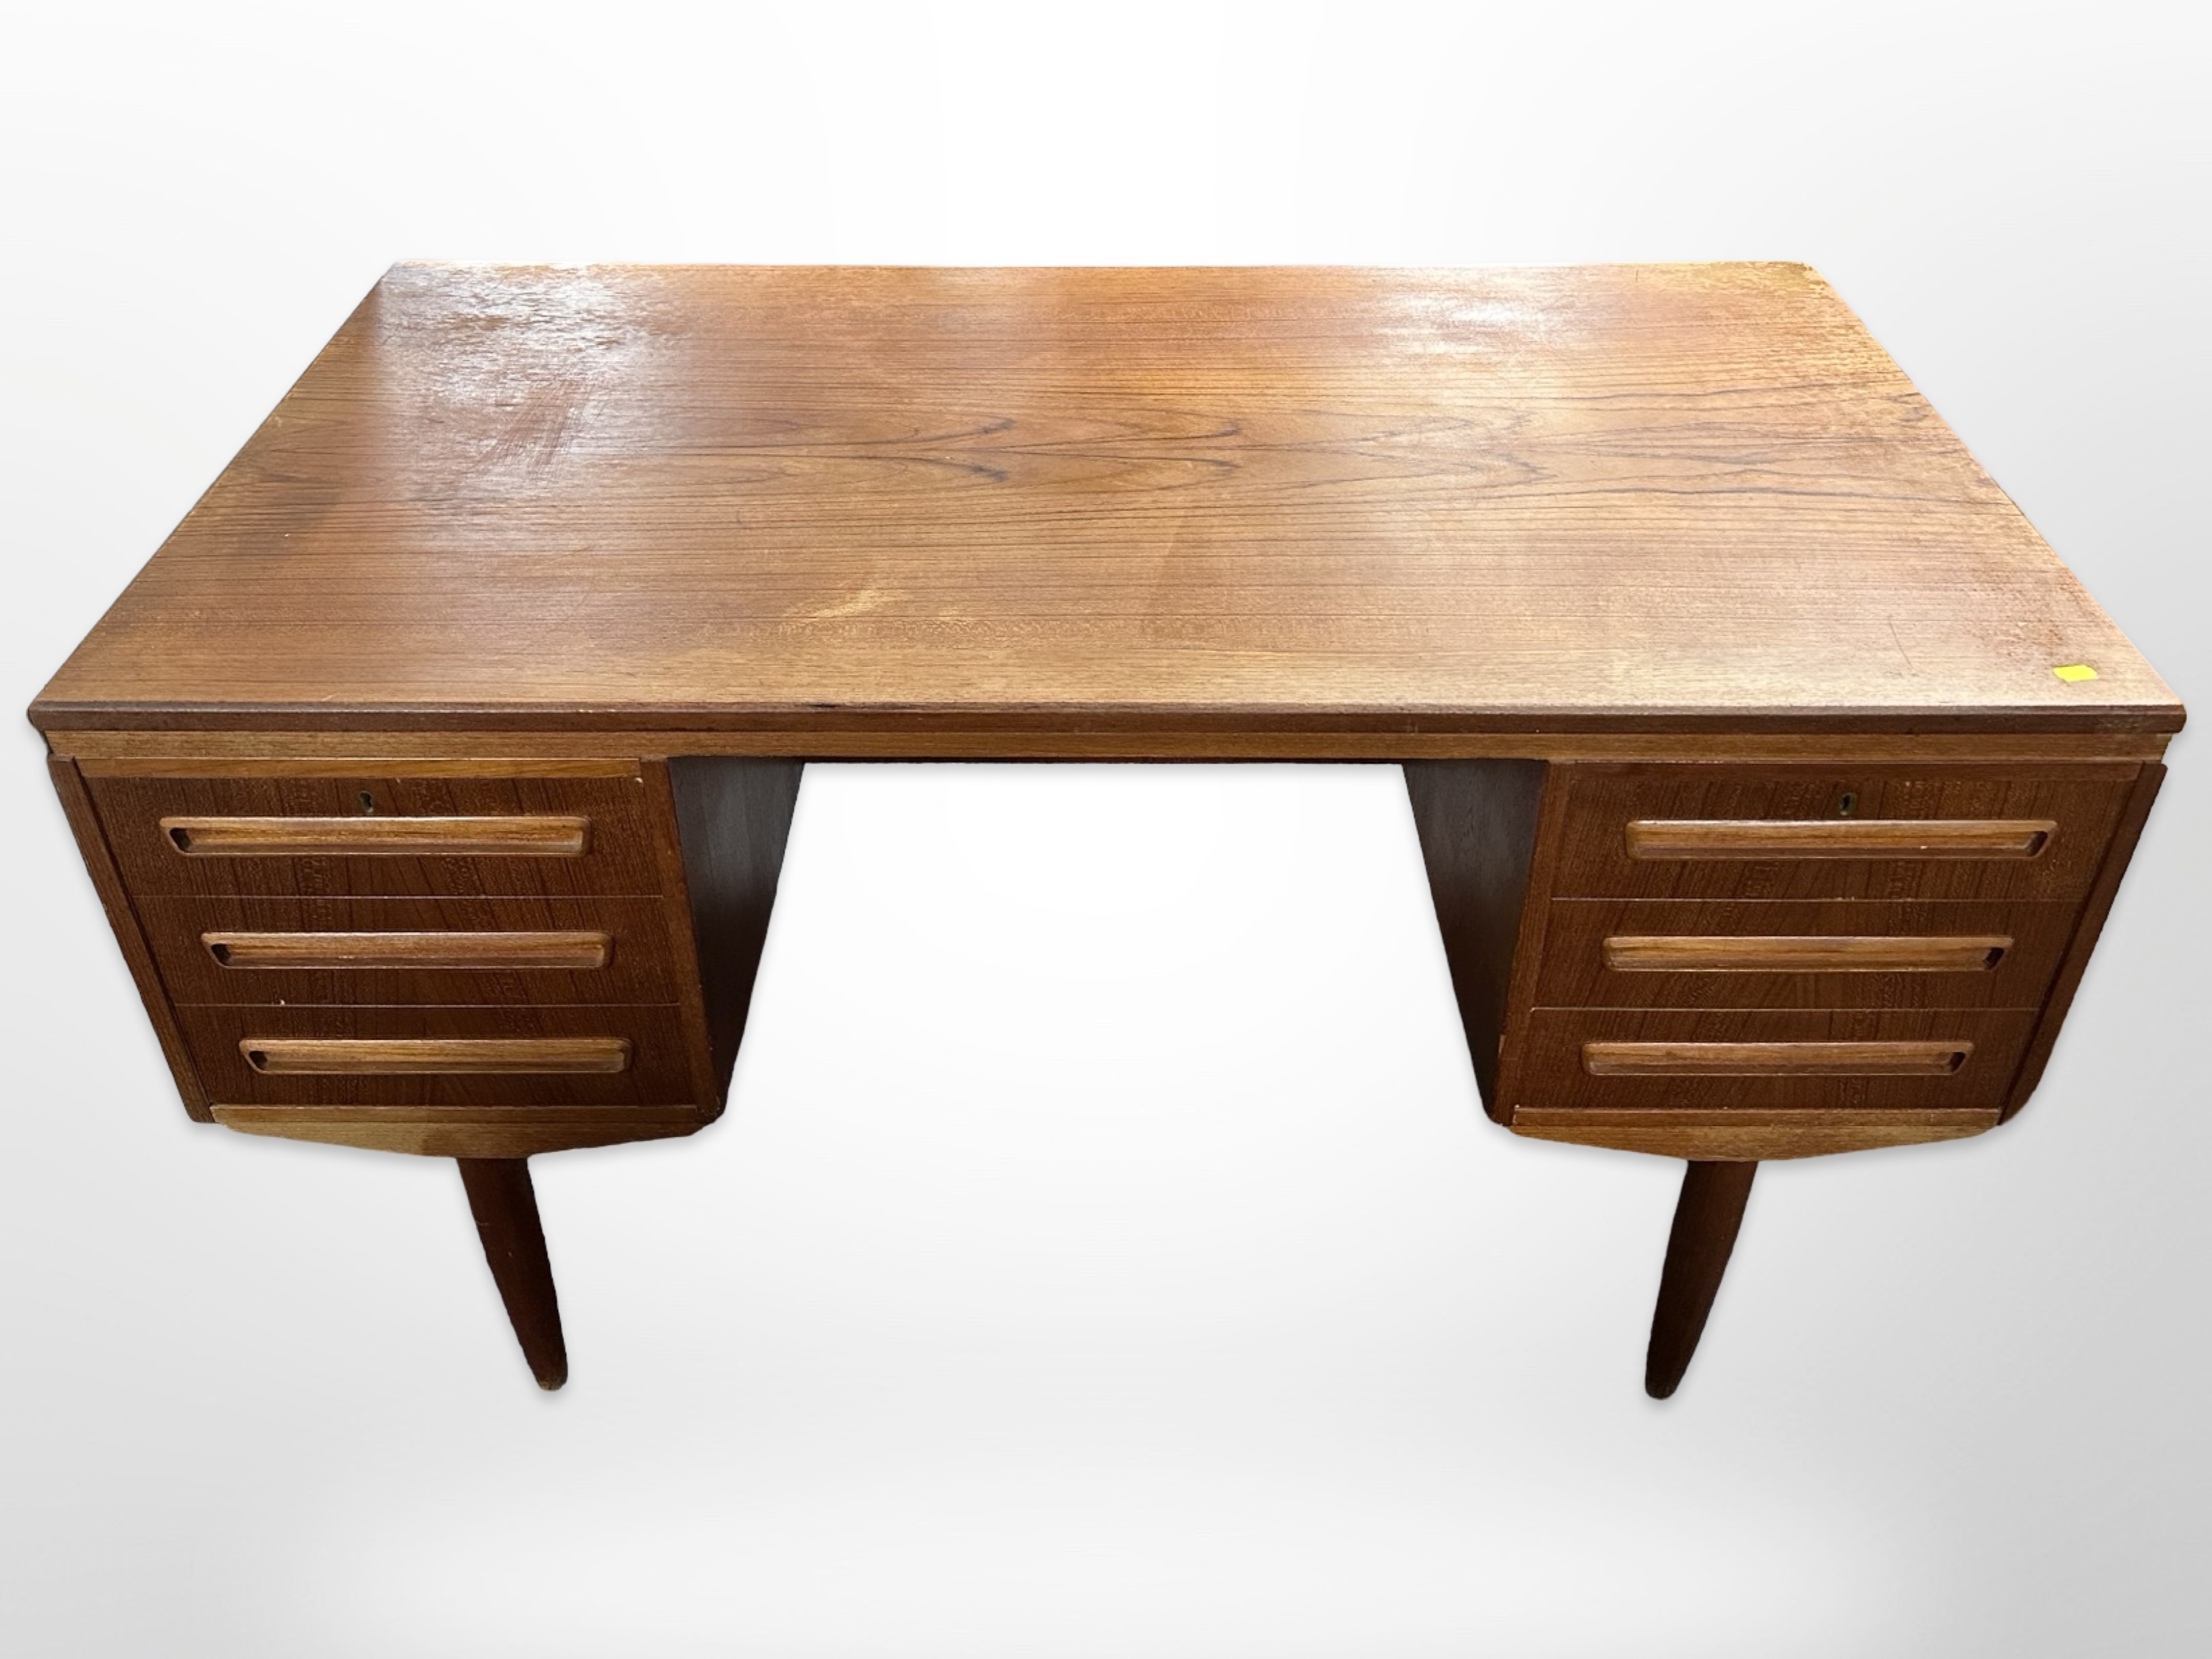 A 20th century Danish teak double sided twin-pedestal writing desk on tapered legs,